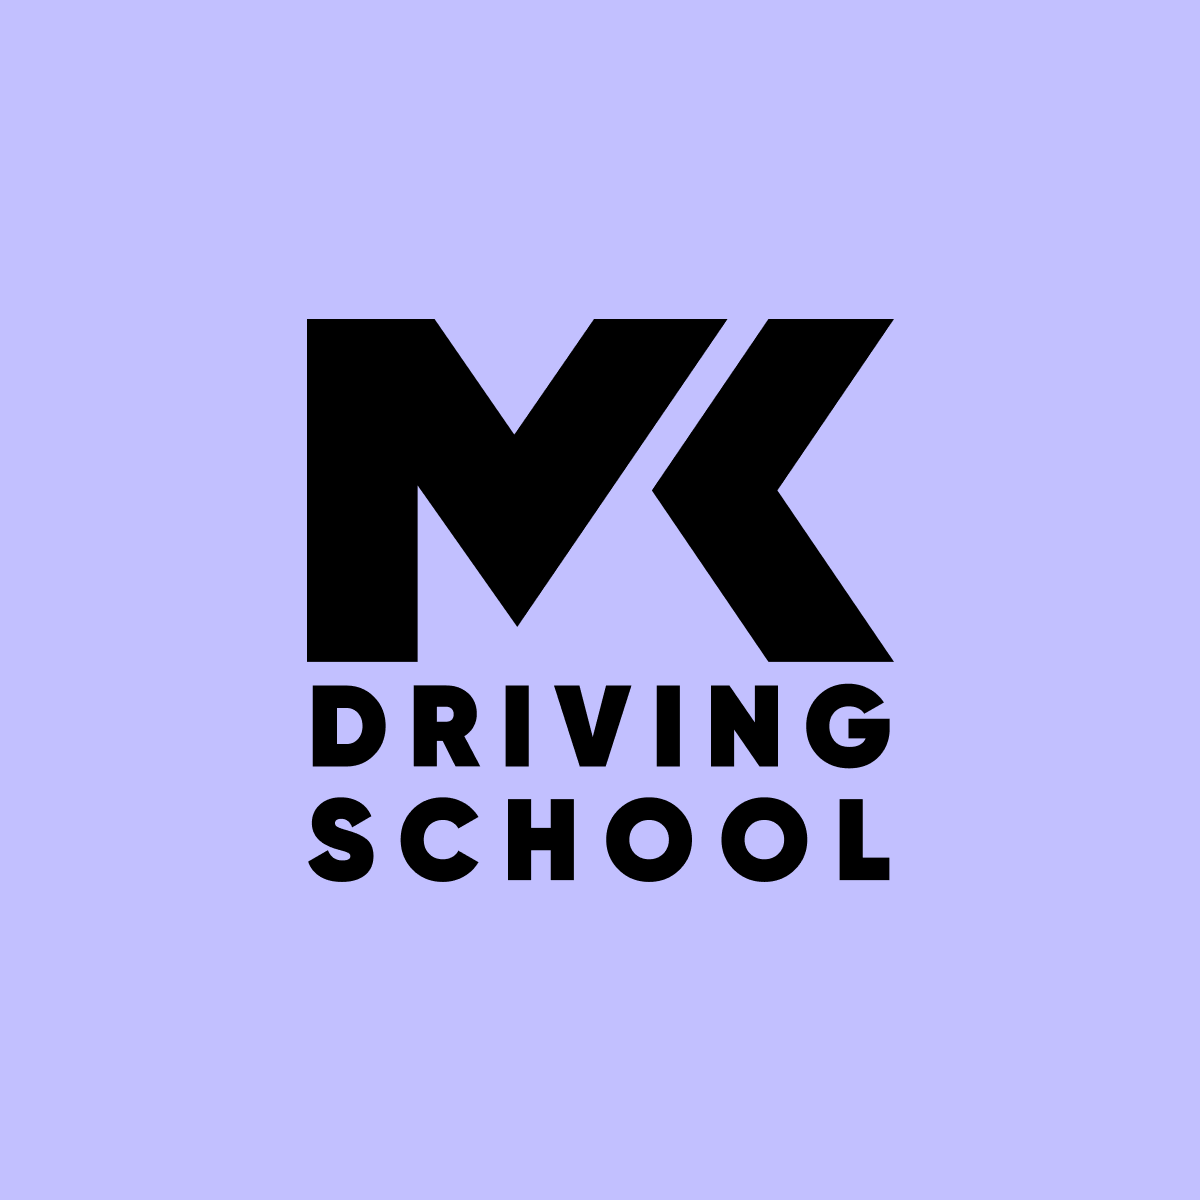 MK Driving School developed by ANW